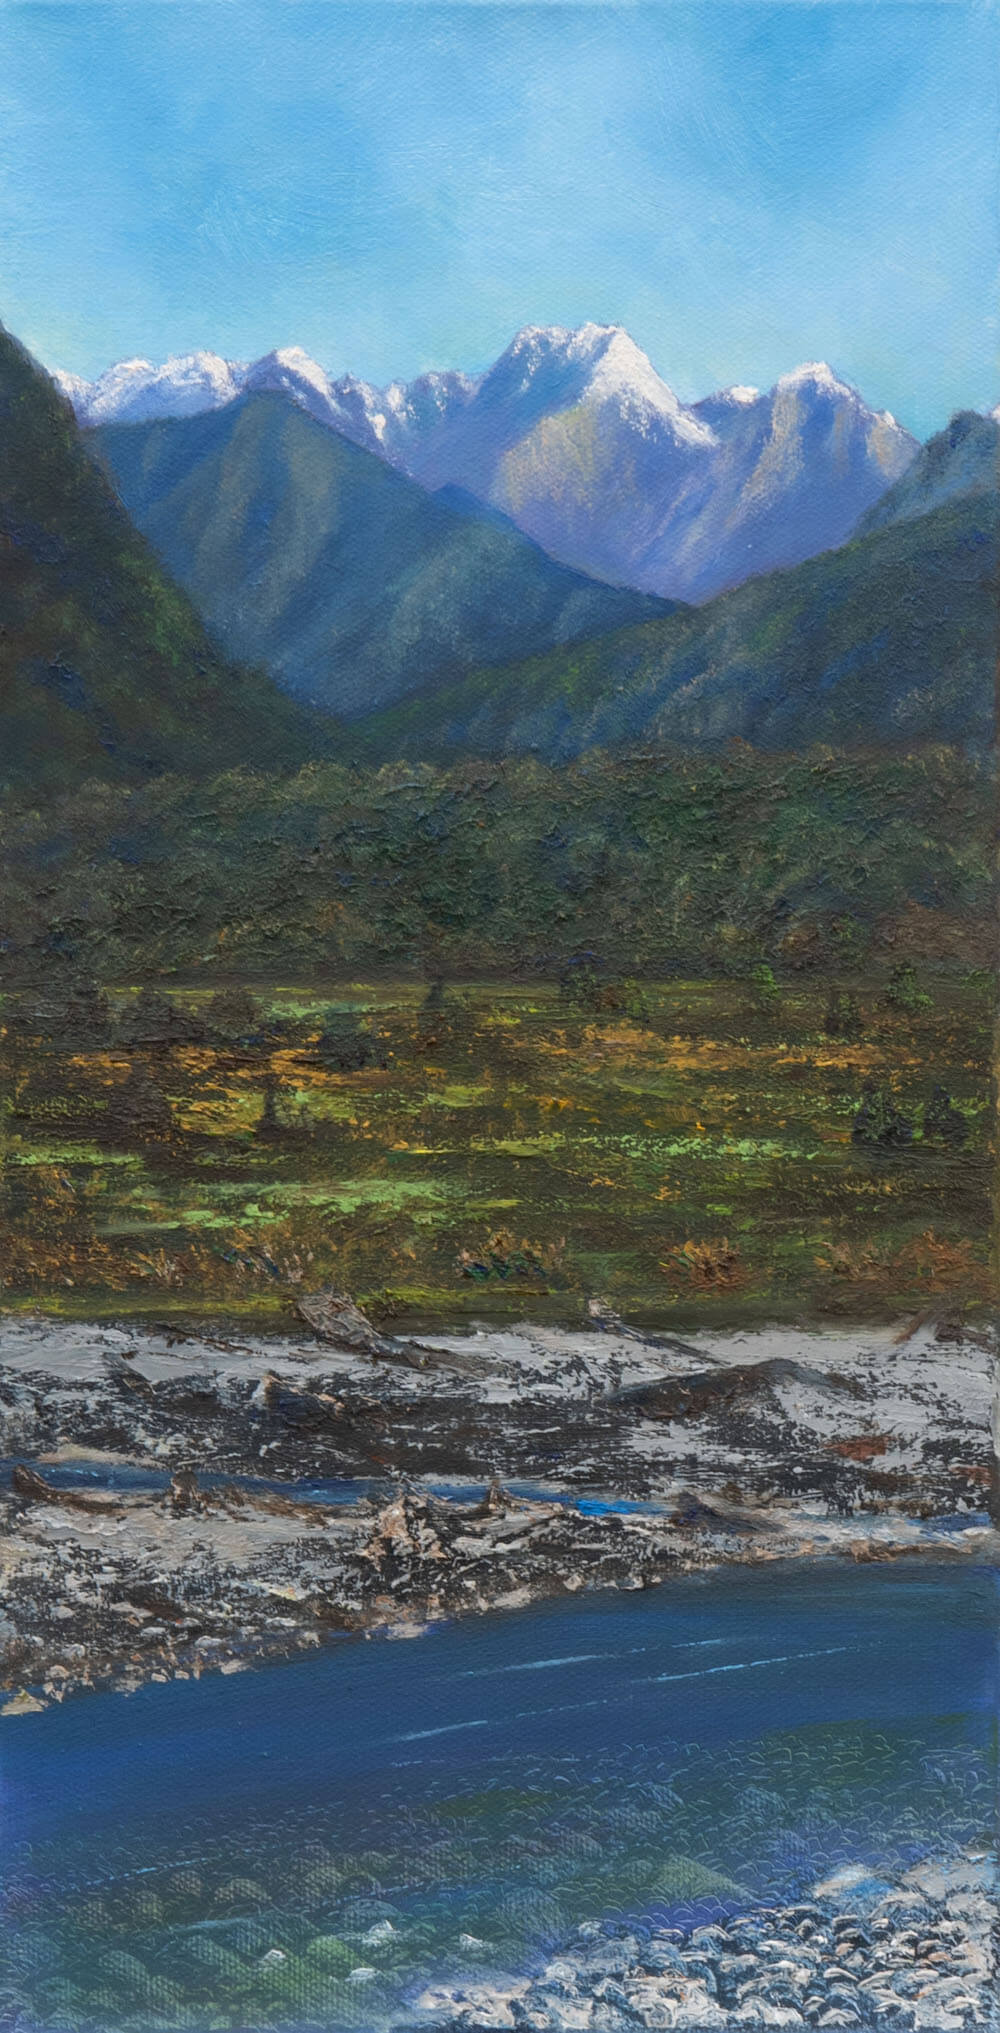 Layers Of Westland oil painting showing the sky, mountain range and river